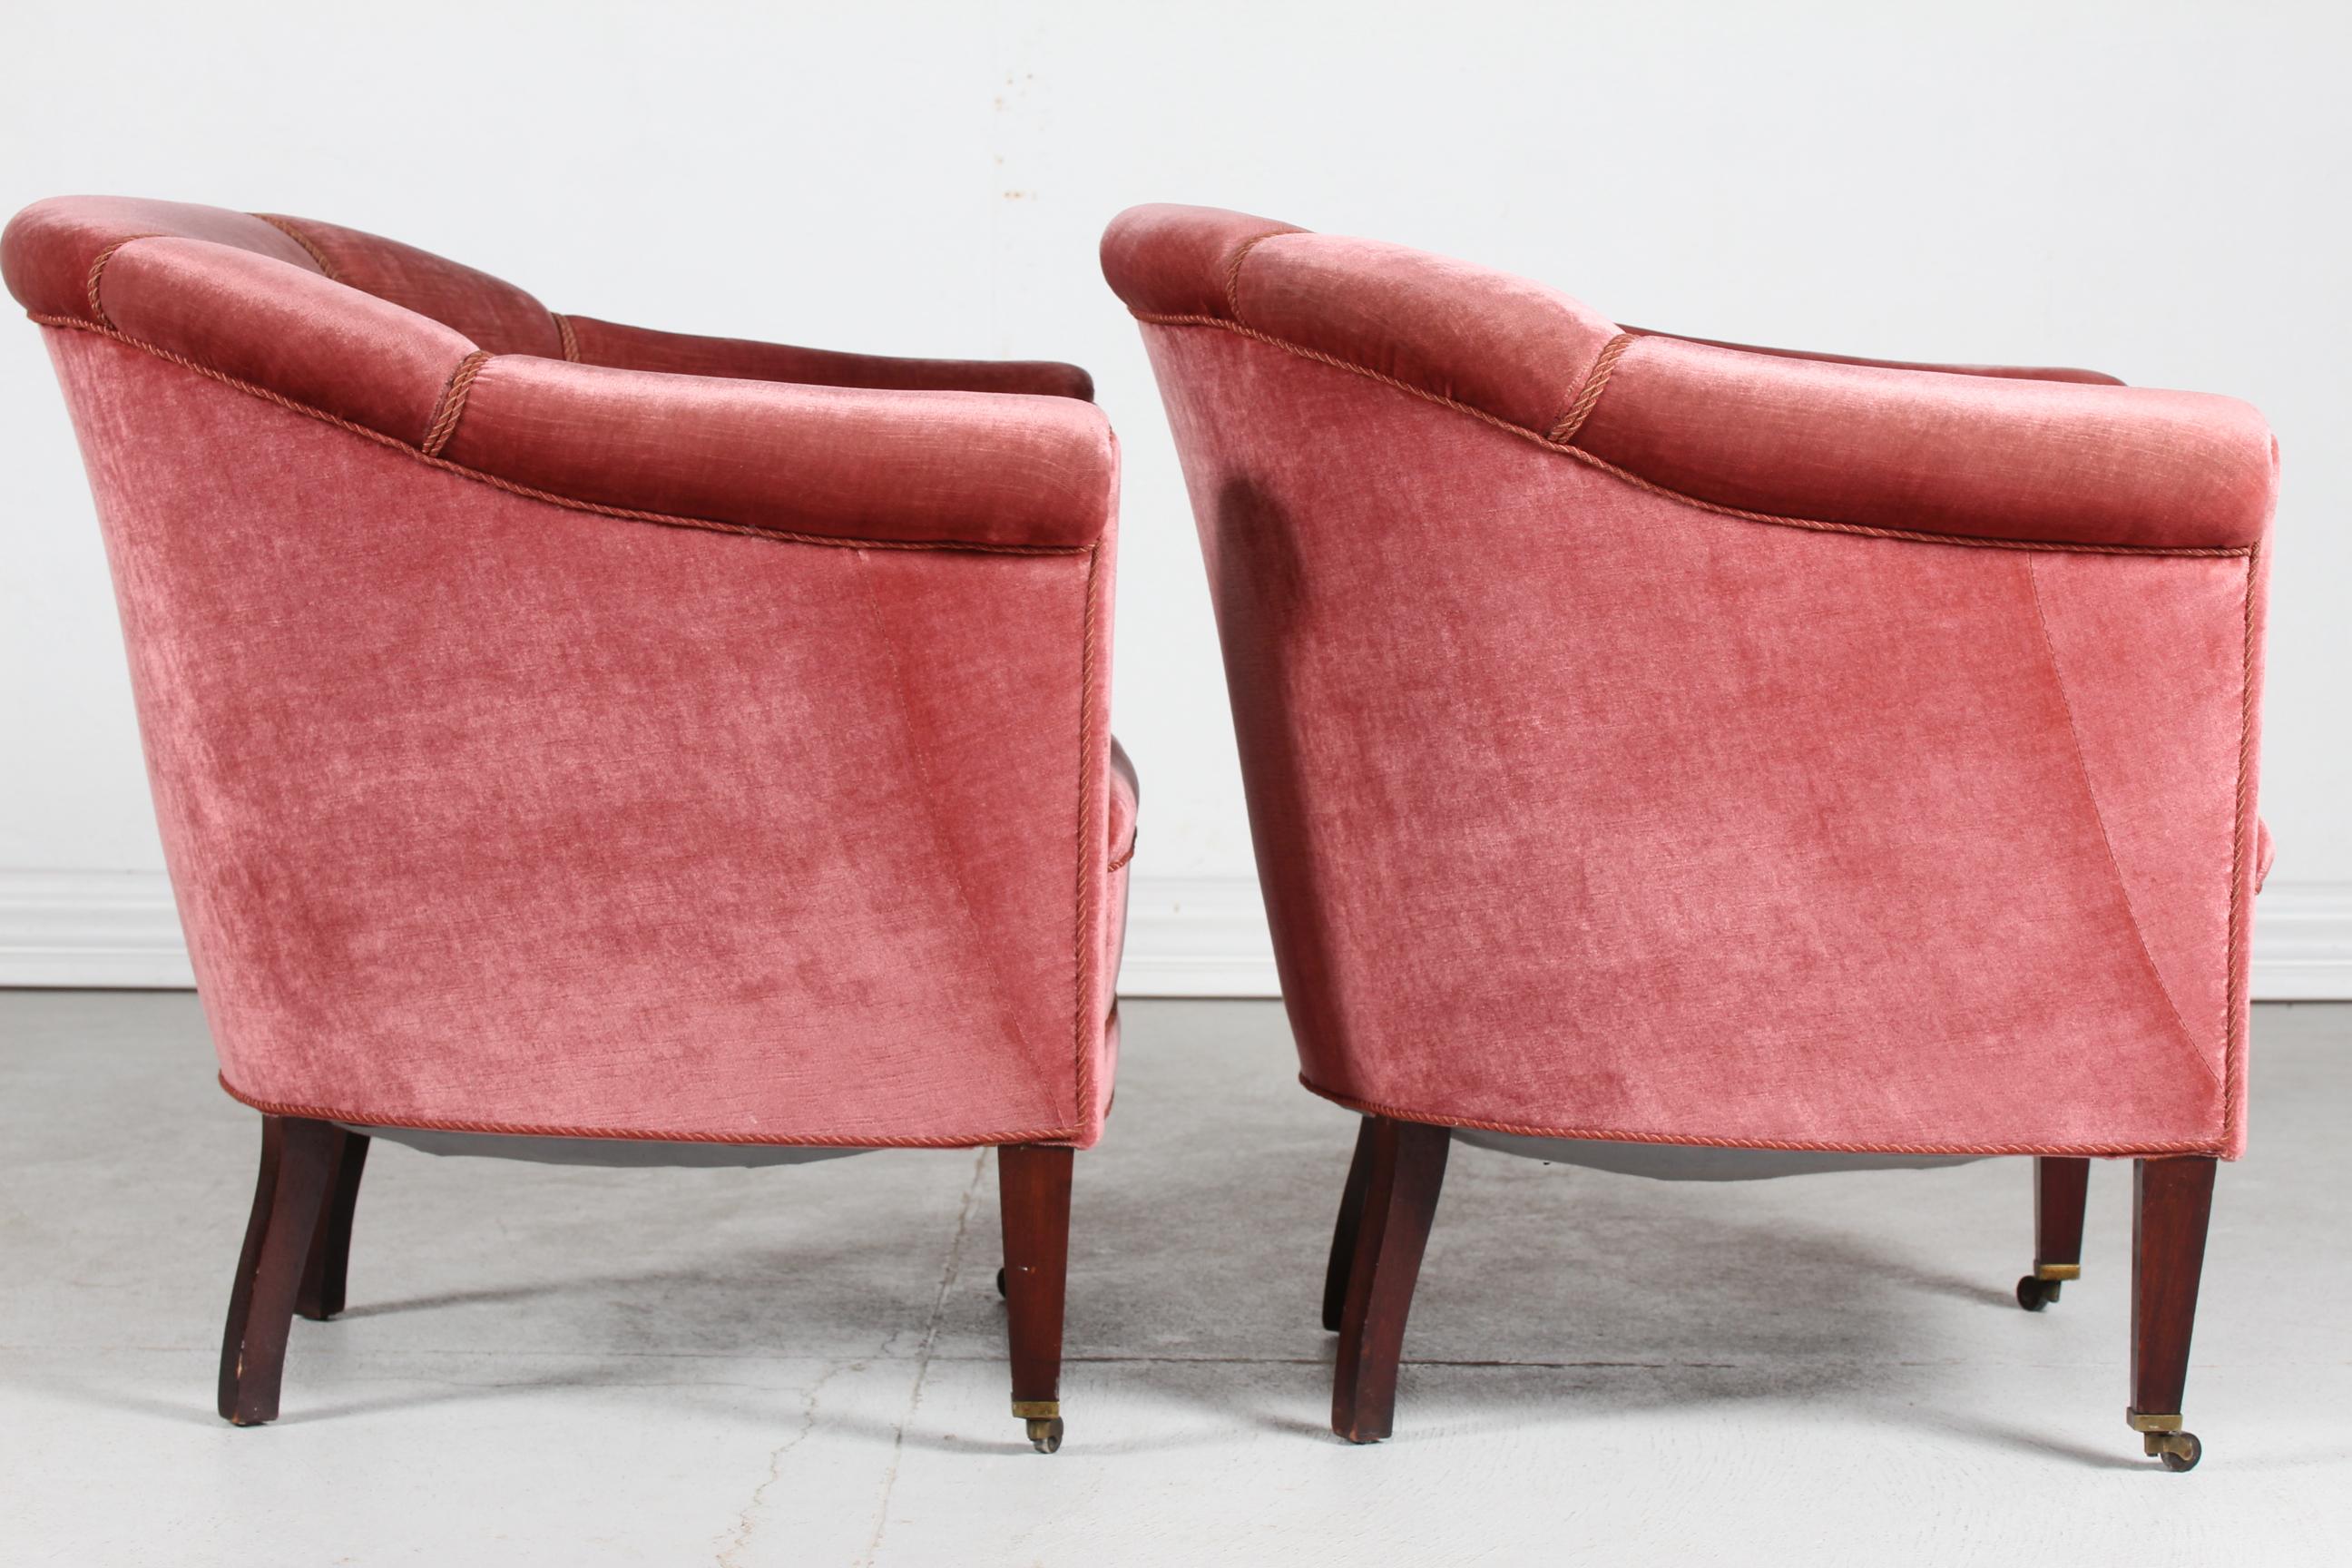 Pair of Old Danish Chesterfield Club Lounge Chairs Upholstered Pink Velvet 1920s 5